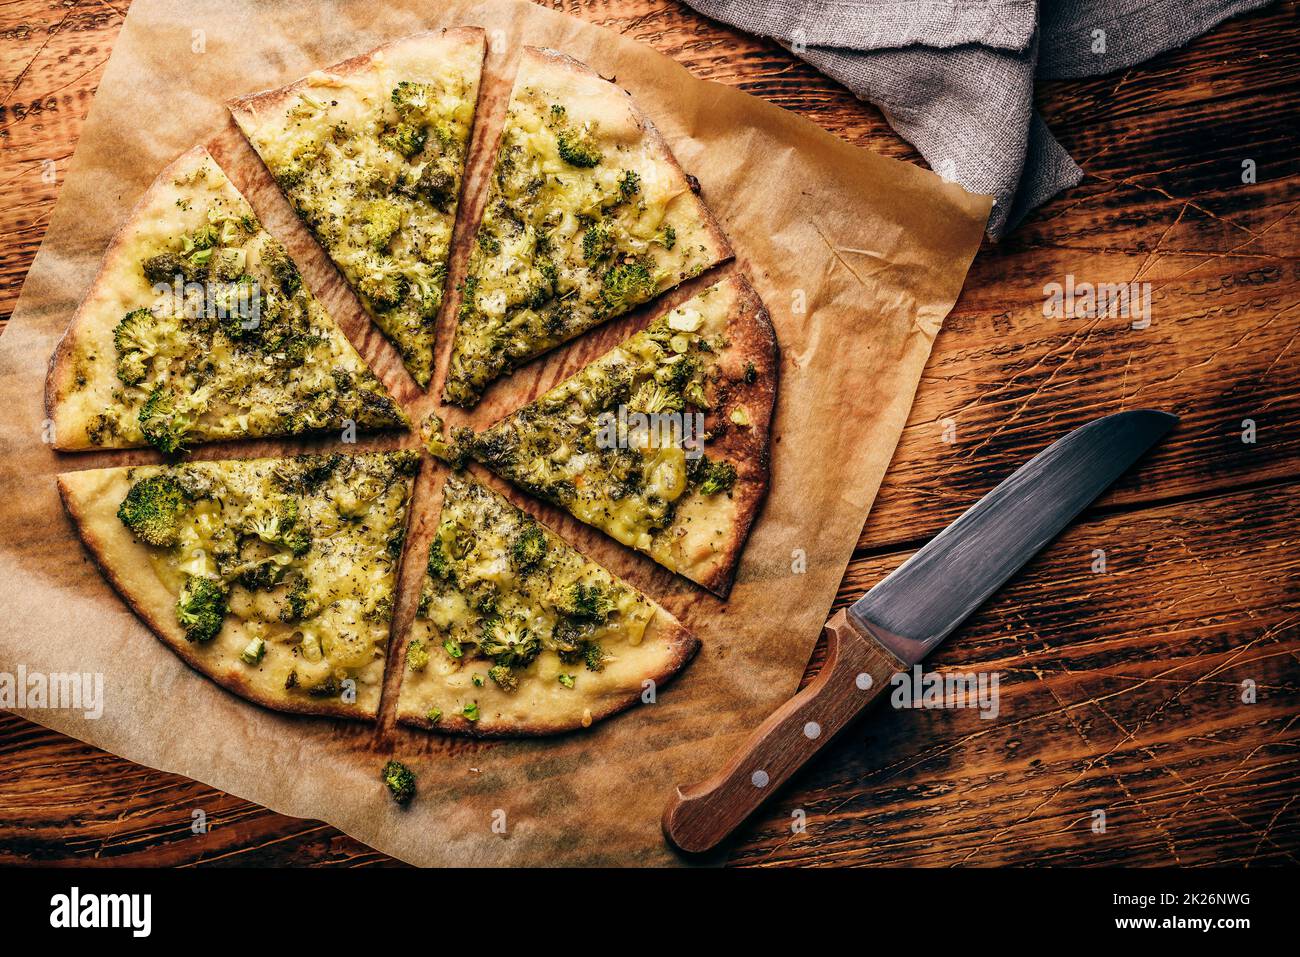 Cooked and sliced broccoli and cheese pizza Stock Photo